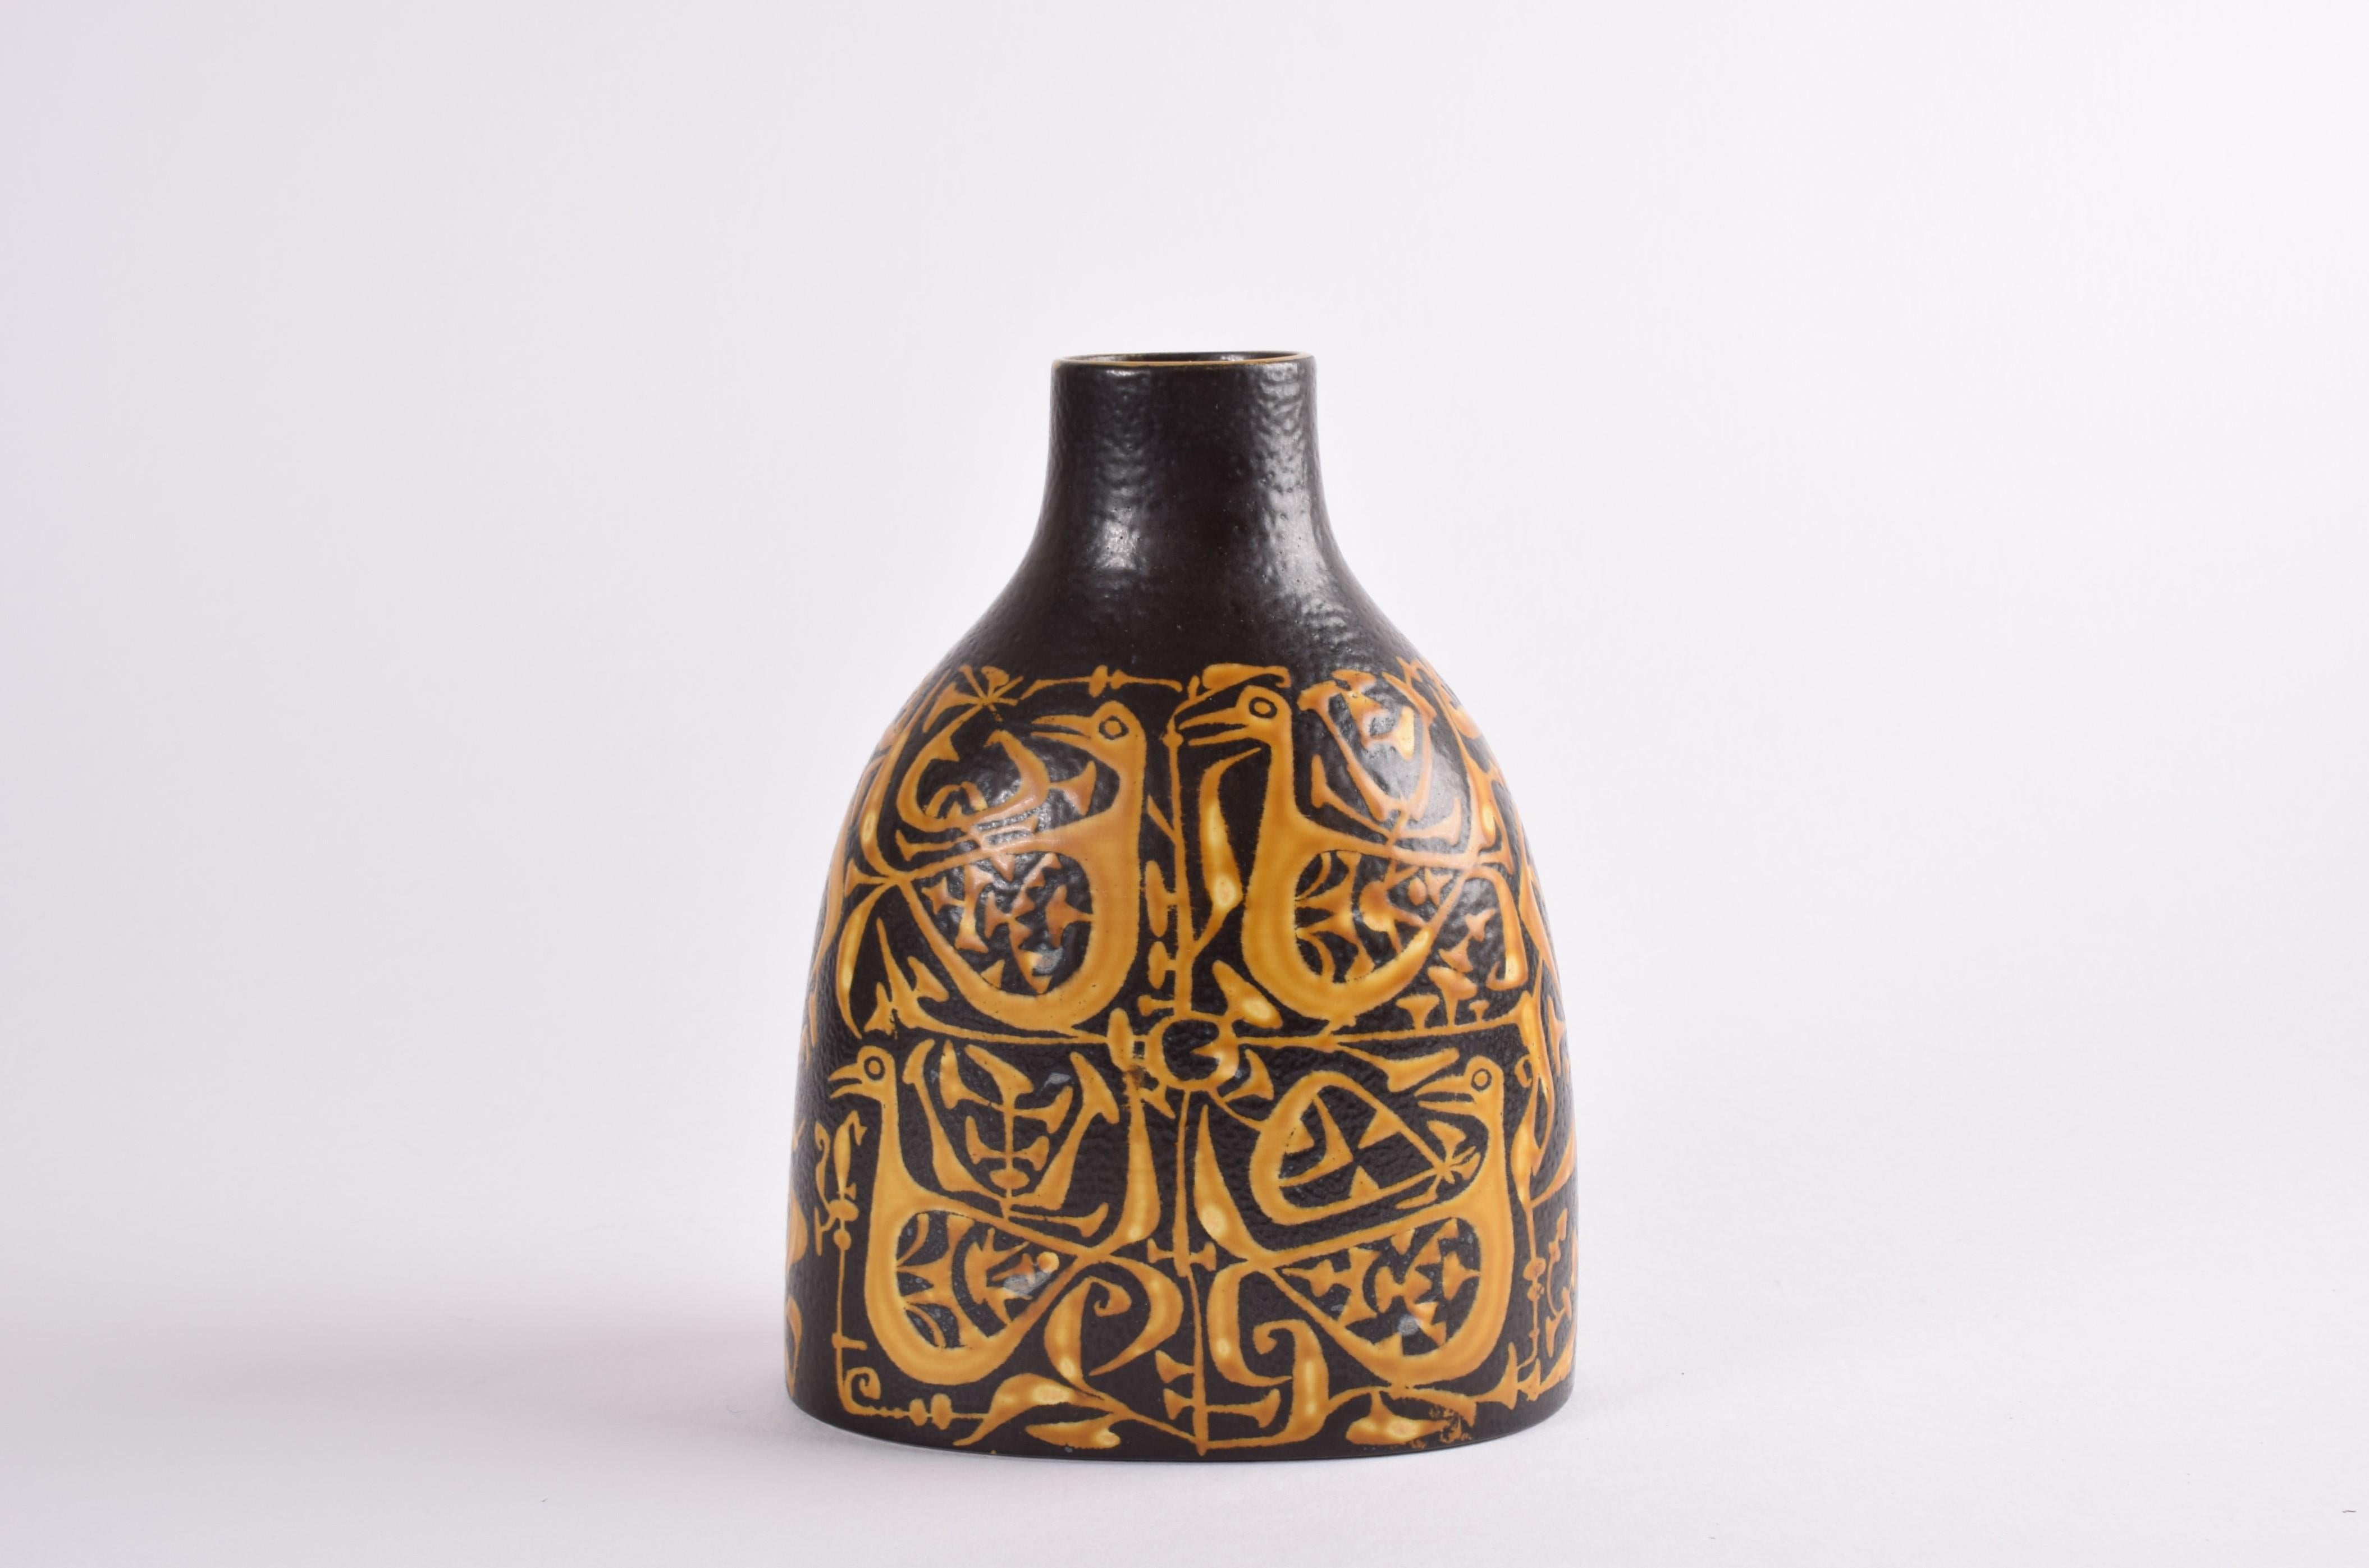 One of the more rare to find vases from Royal Copenhagen 